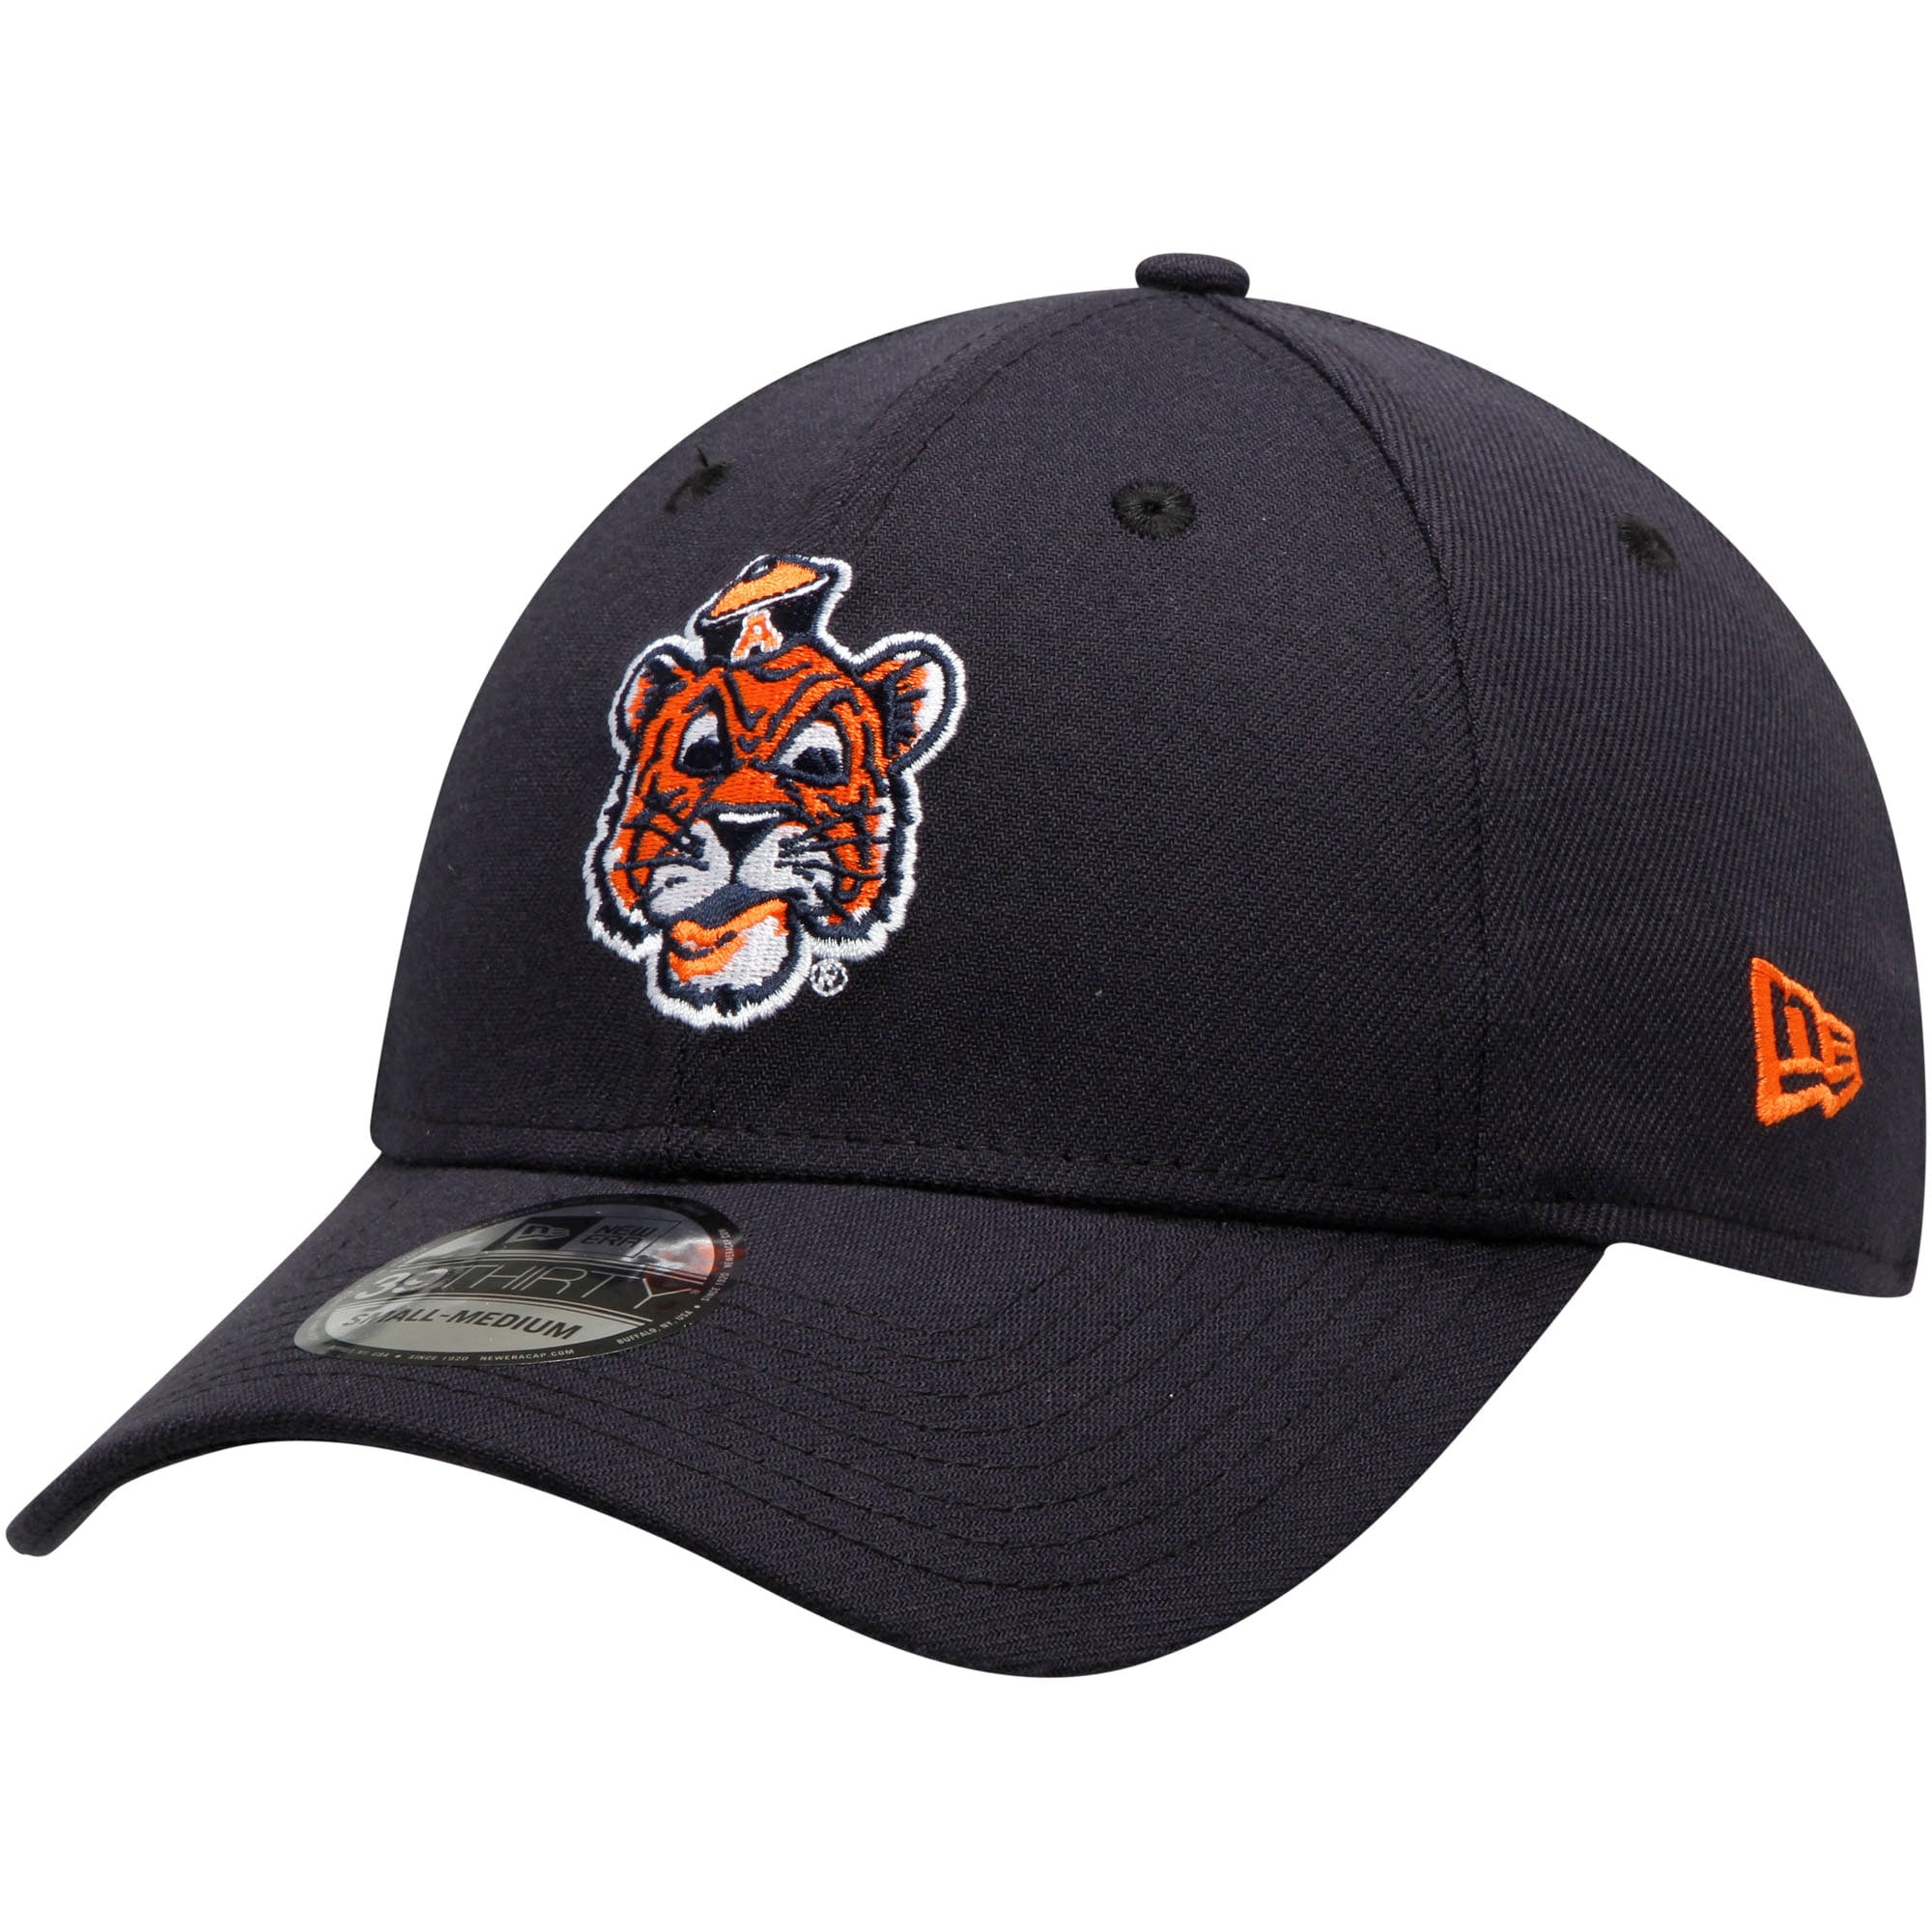 NAVY UNSTRUCTURED NEW SPORTS HAT NCAA LICENCED AUBURN TIGERS 